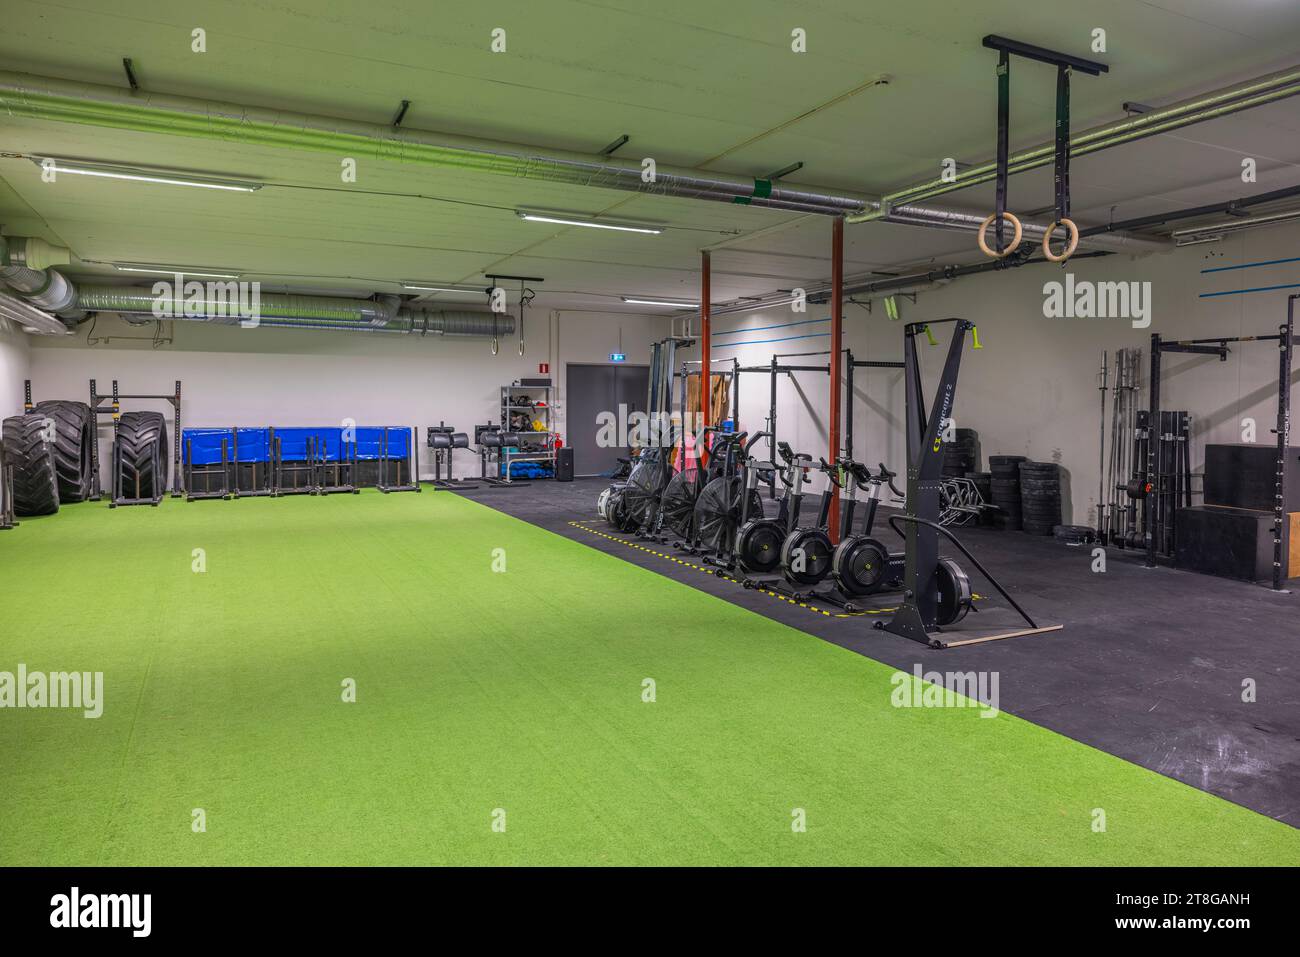 Basement gym with diverse exercise machines, promoting healthy lifestyle concept. Stock Photo